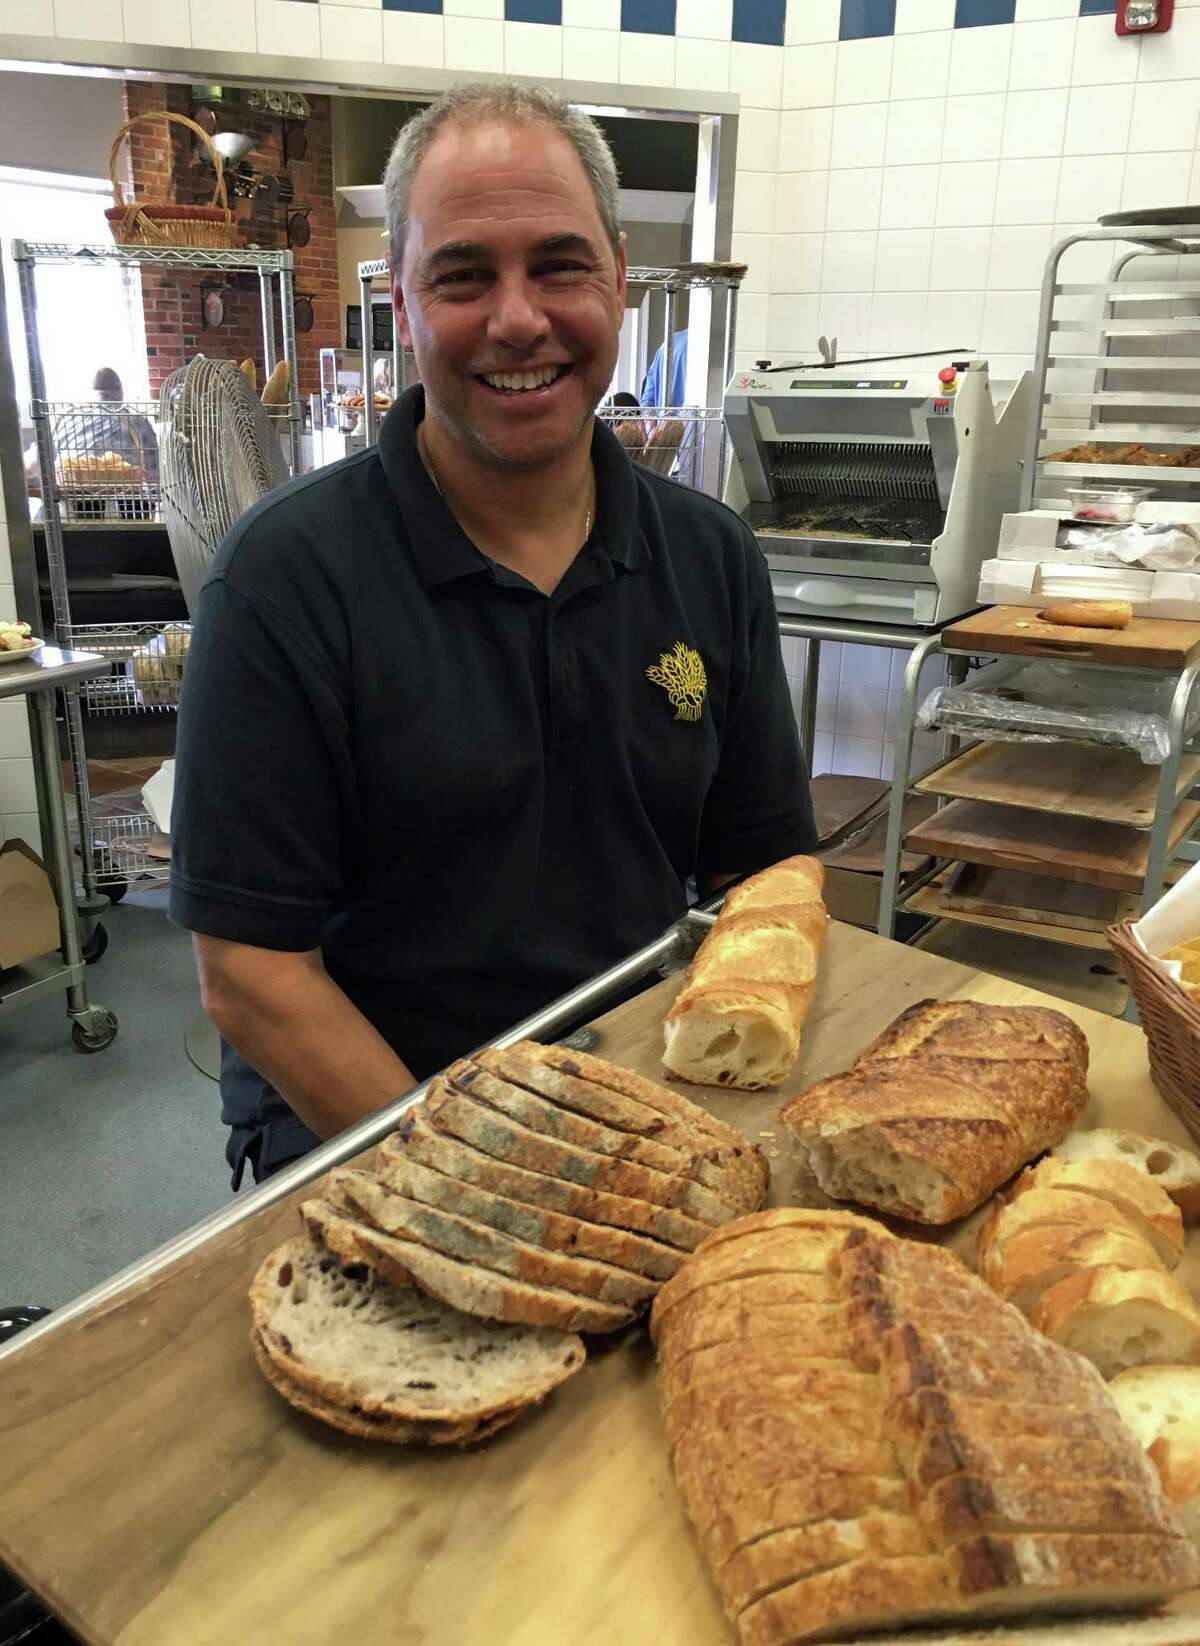 John Barricelli, owner, baker and chef of SoNo Baking Company & Cafe, creates dozens of baked goods, including bread.